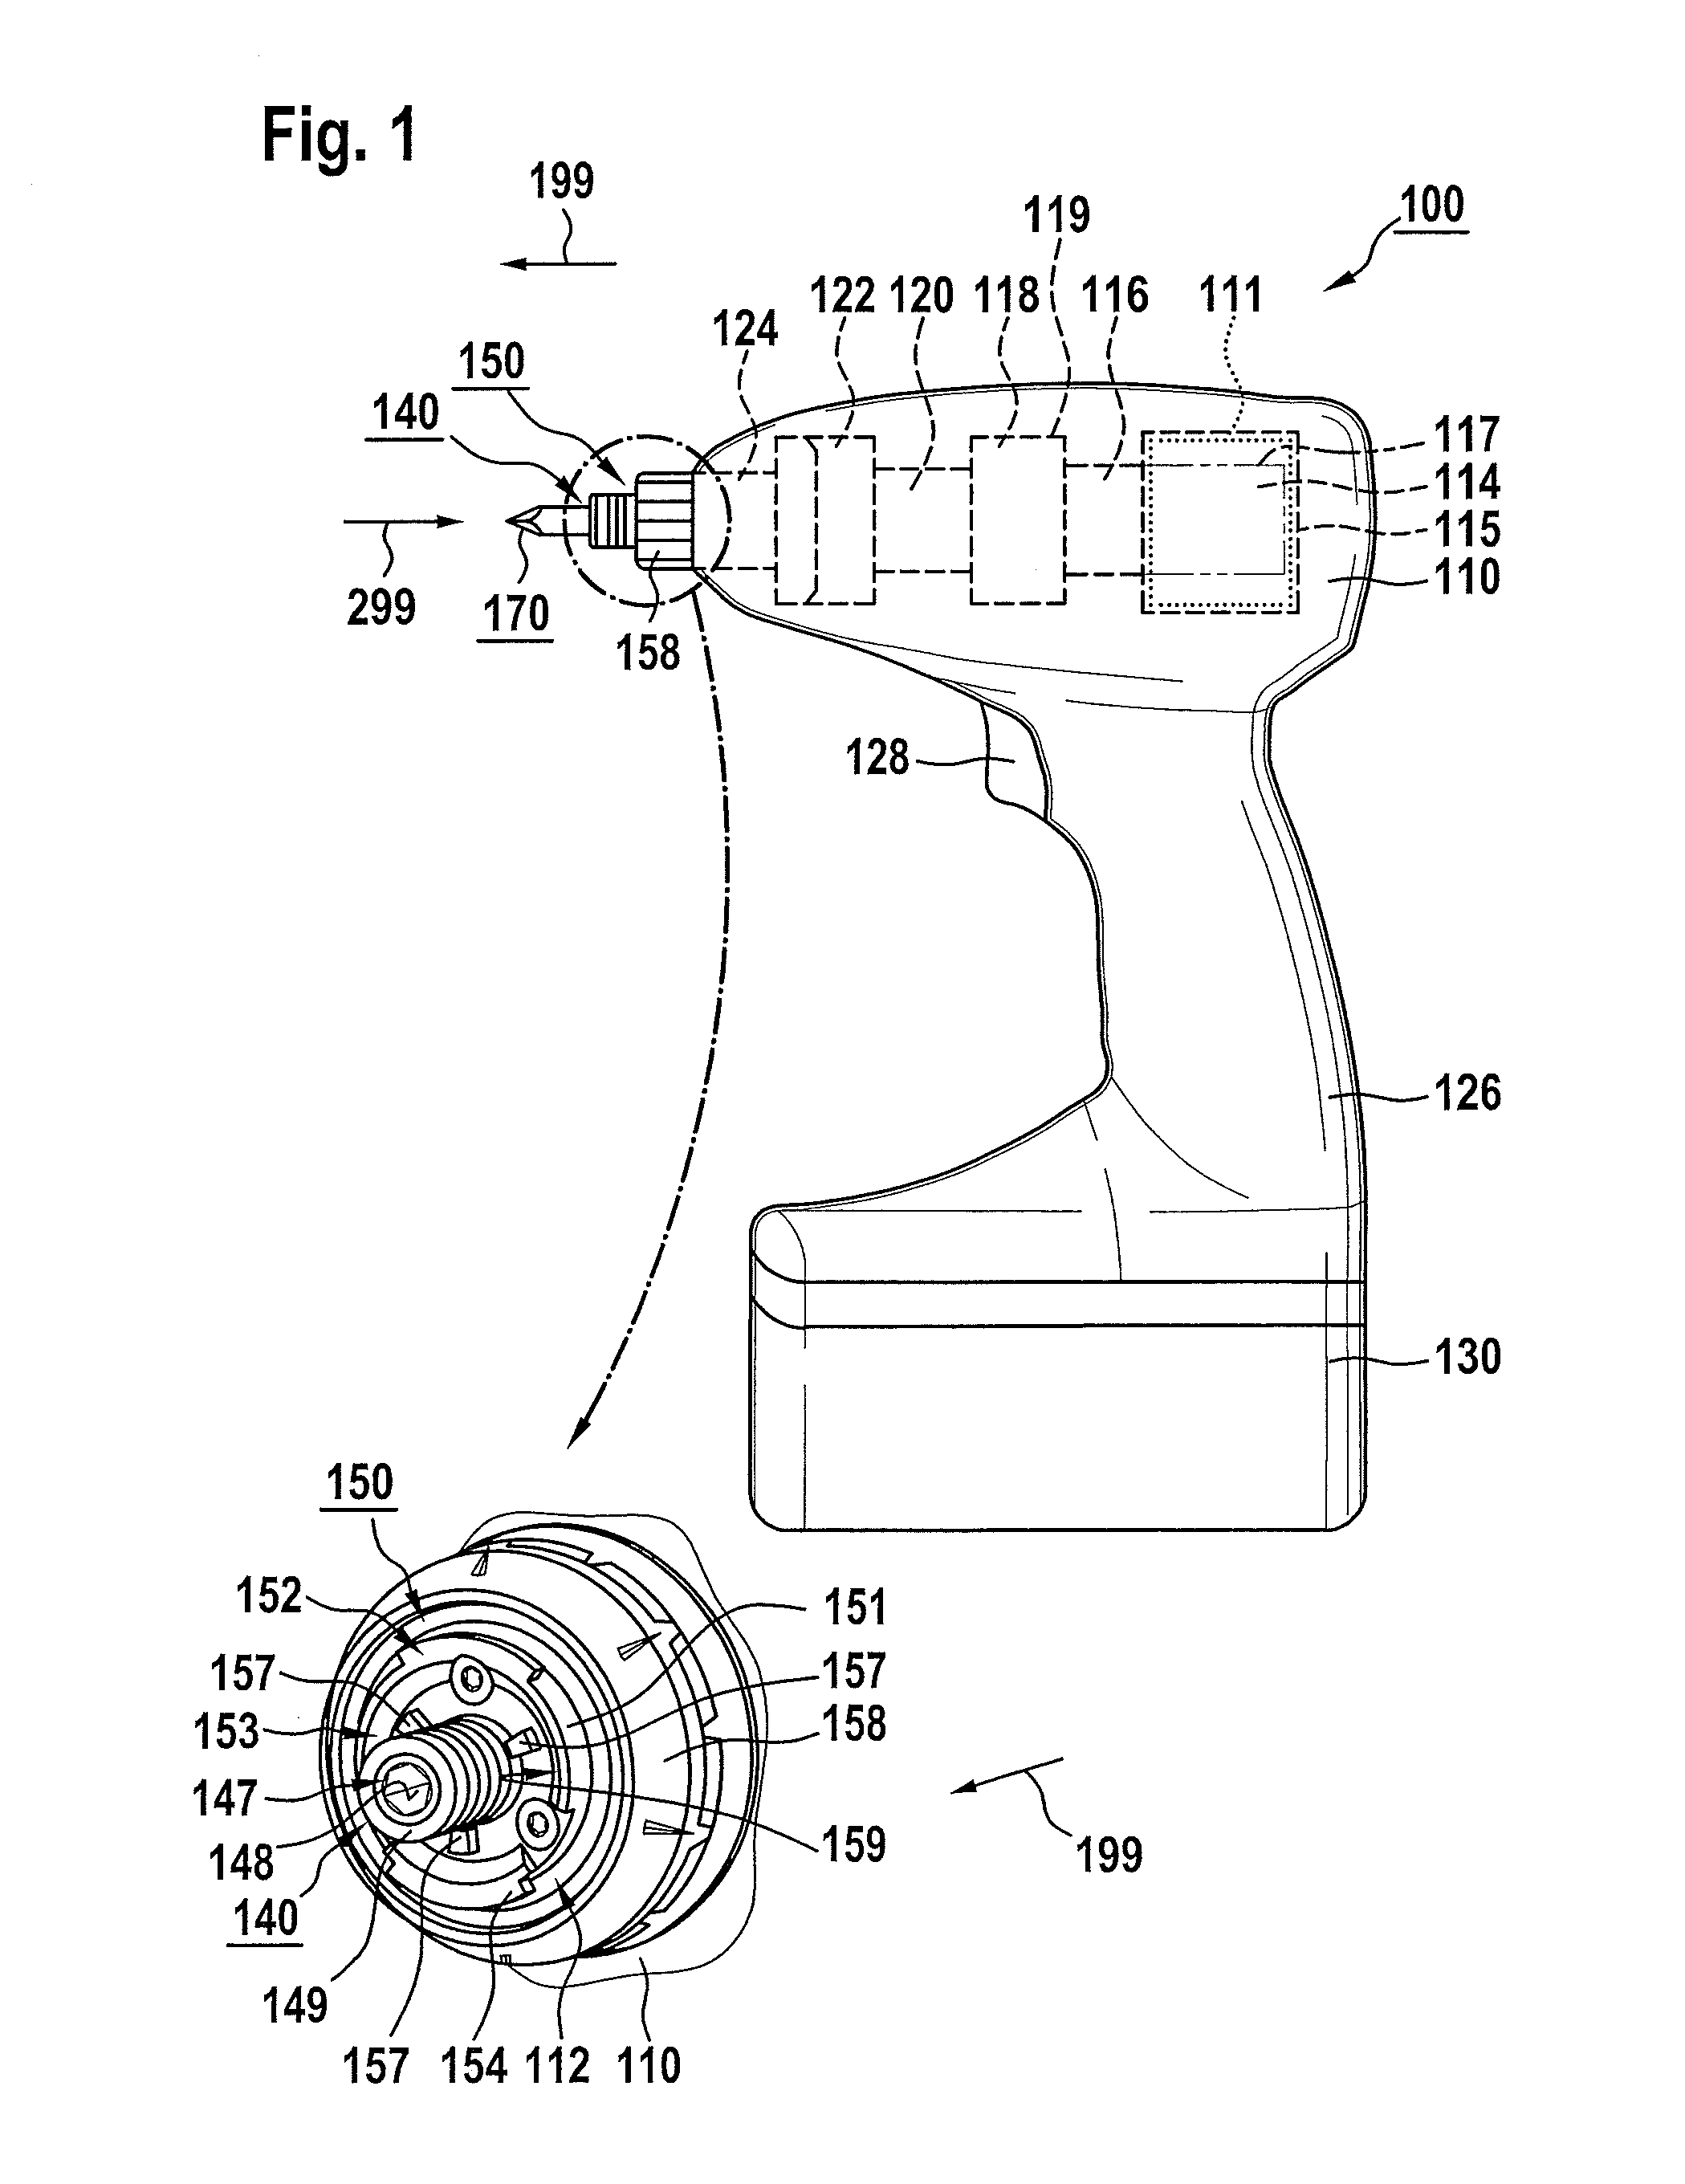 Tool attachment for a handheld machine tool